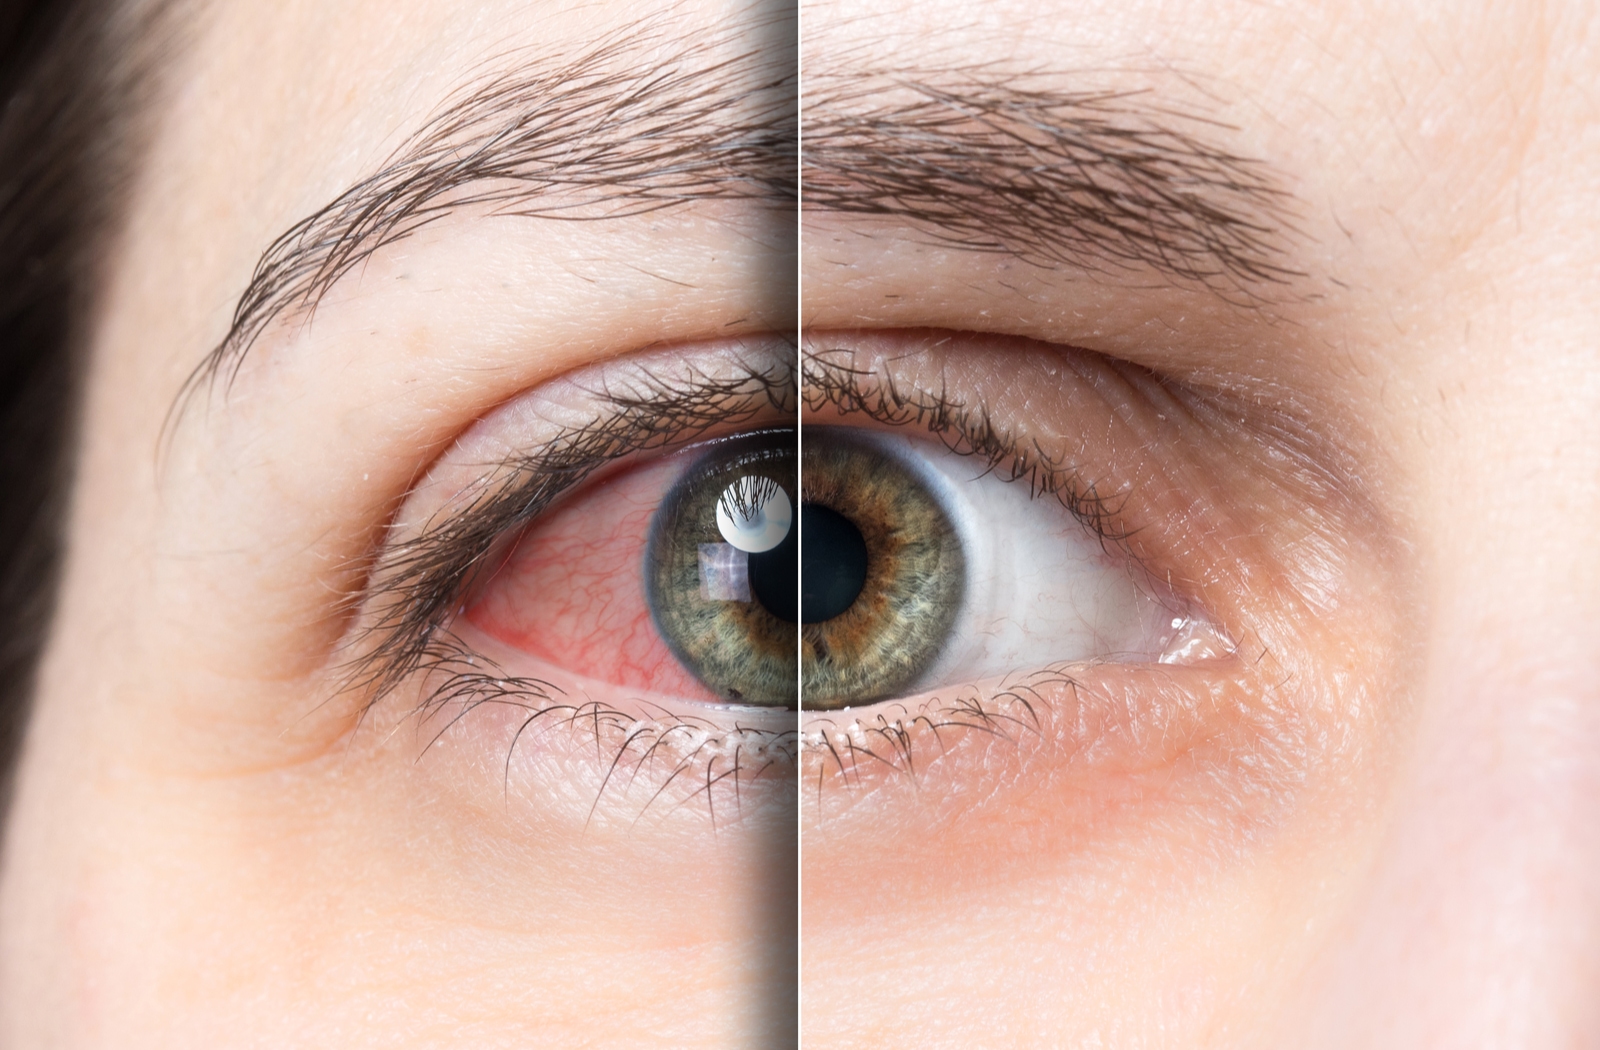 Close up image of an eye with a line drawn over, showing red dry eye on the left, and a normal eye on the right.